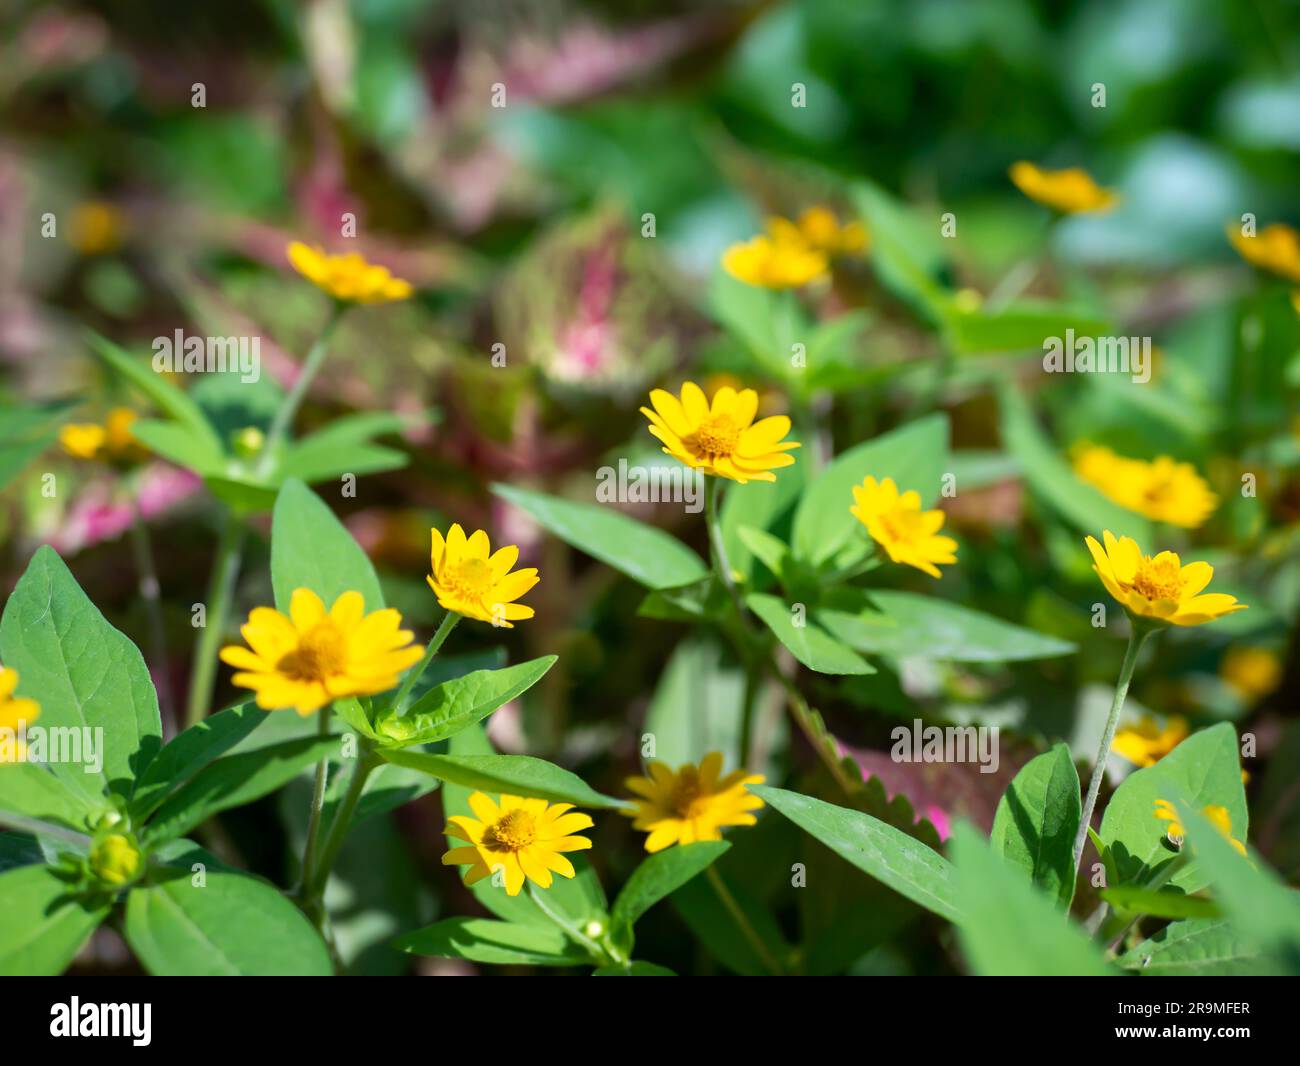 Mini sun flower, yellow flower Rudbeckia, Heliopsis helianthoides, blooming toward the sky, in shallow focus Stock Photo